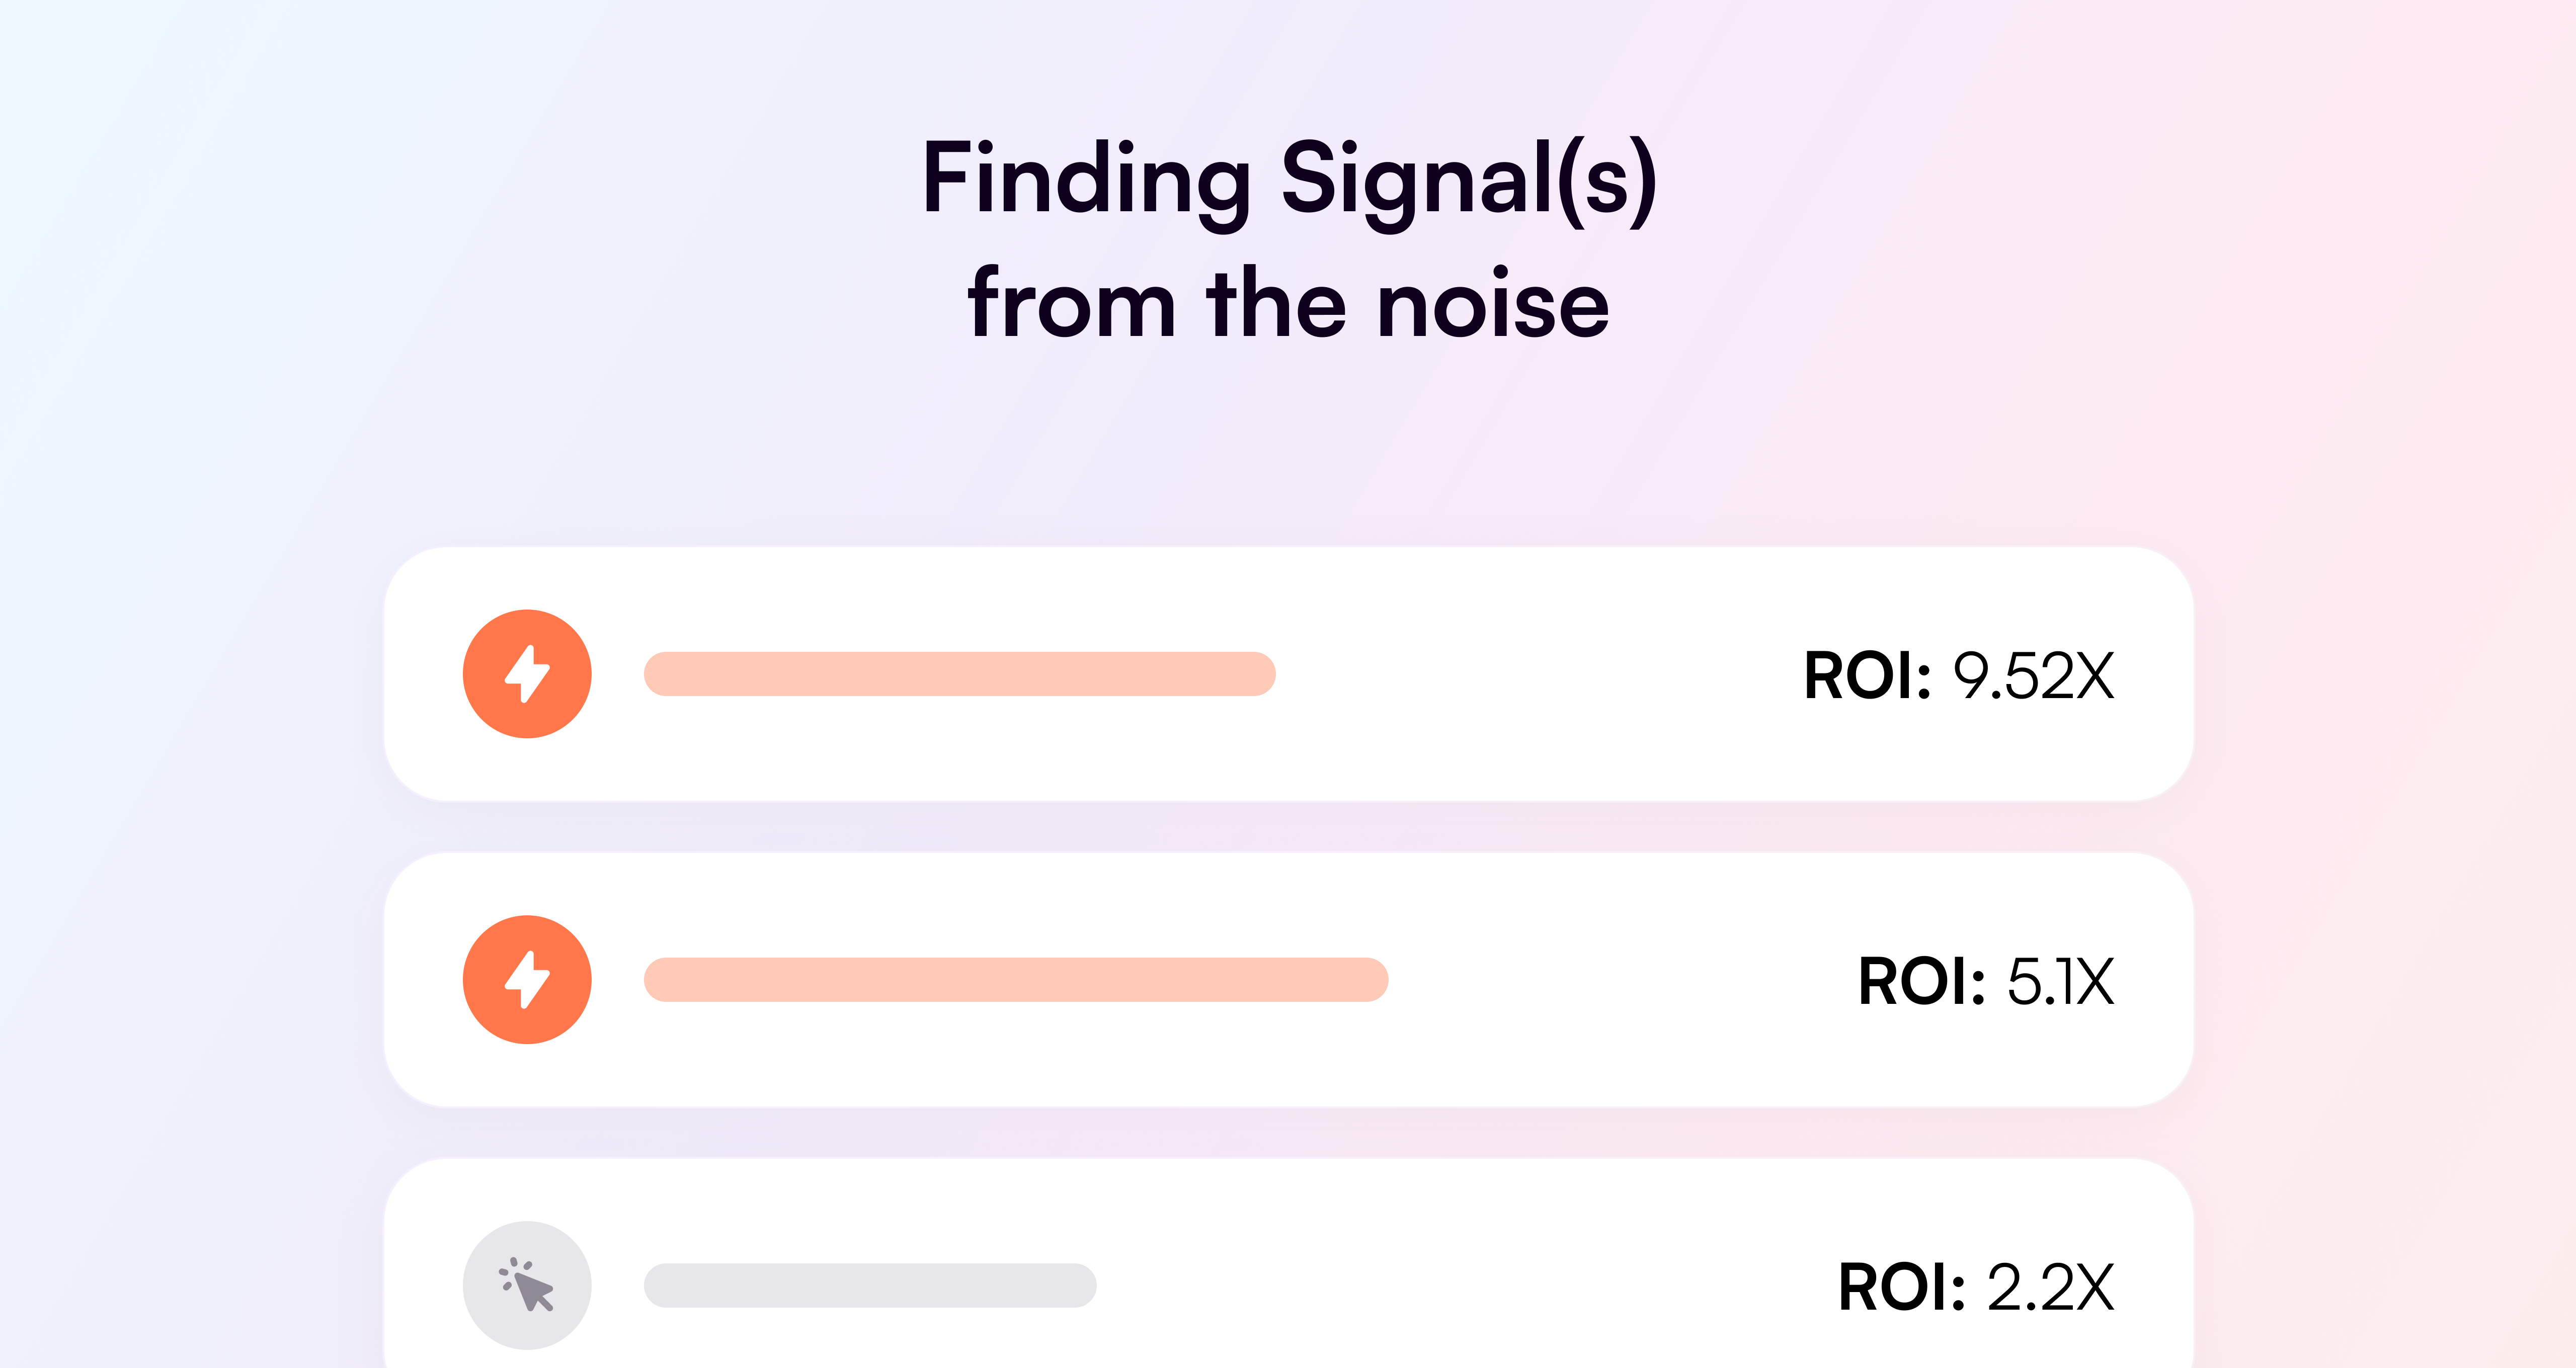 Part 3: Finding Signal(s) from the noise